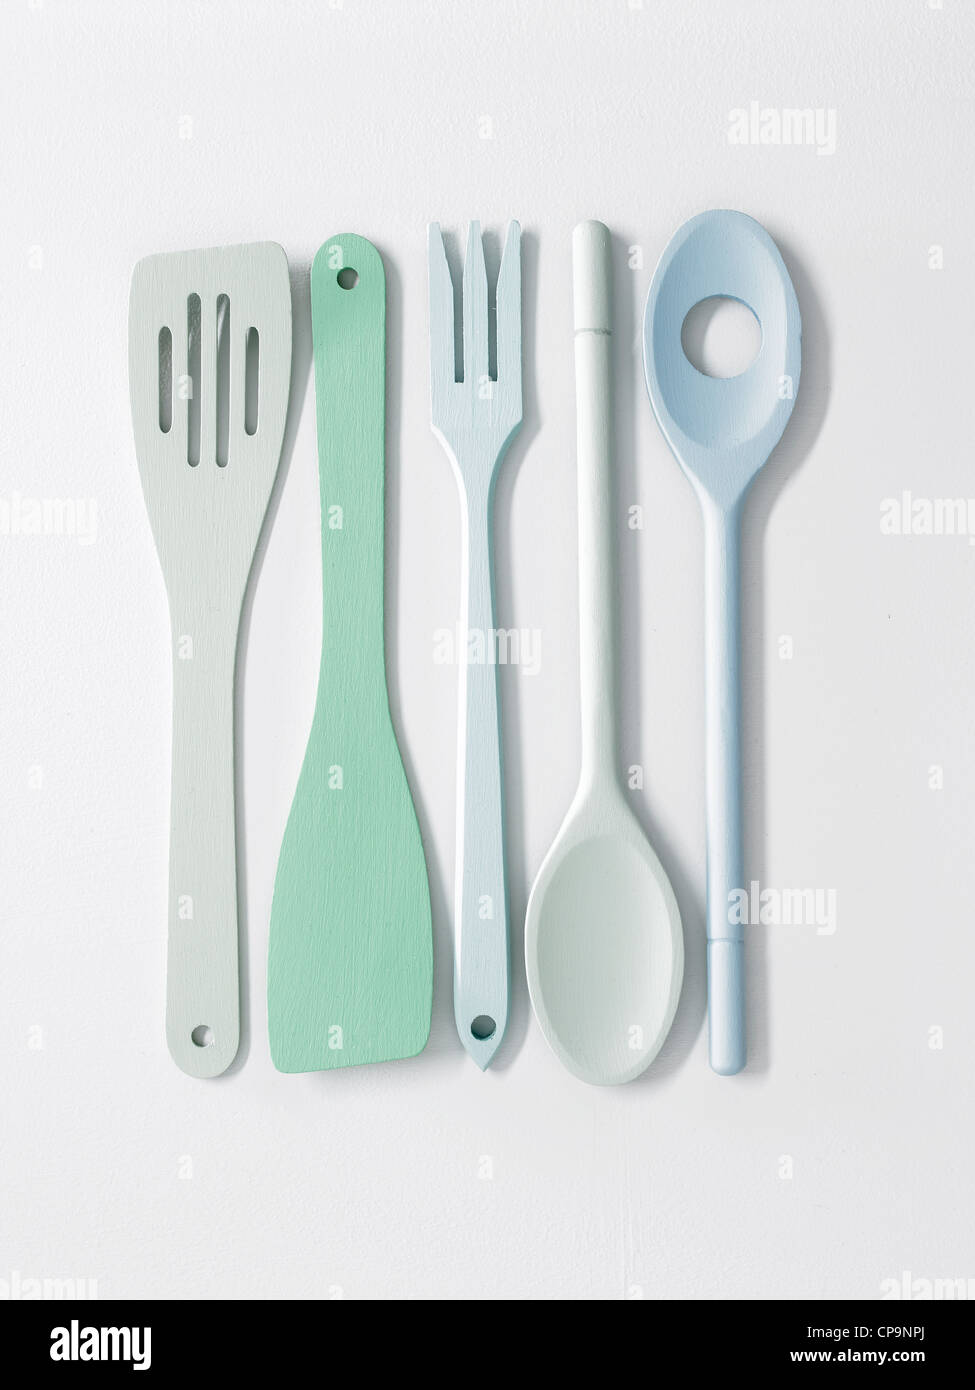 painted colored wooden kitchen utensils Stock Photo